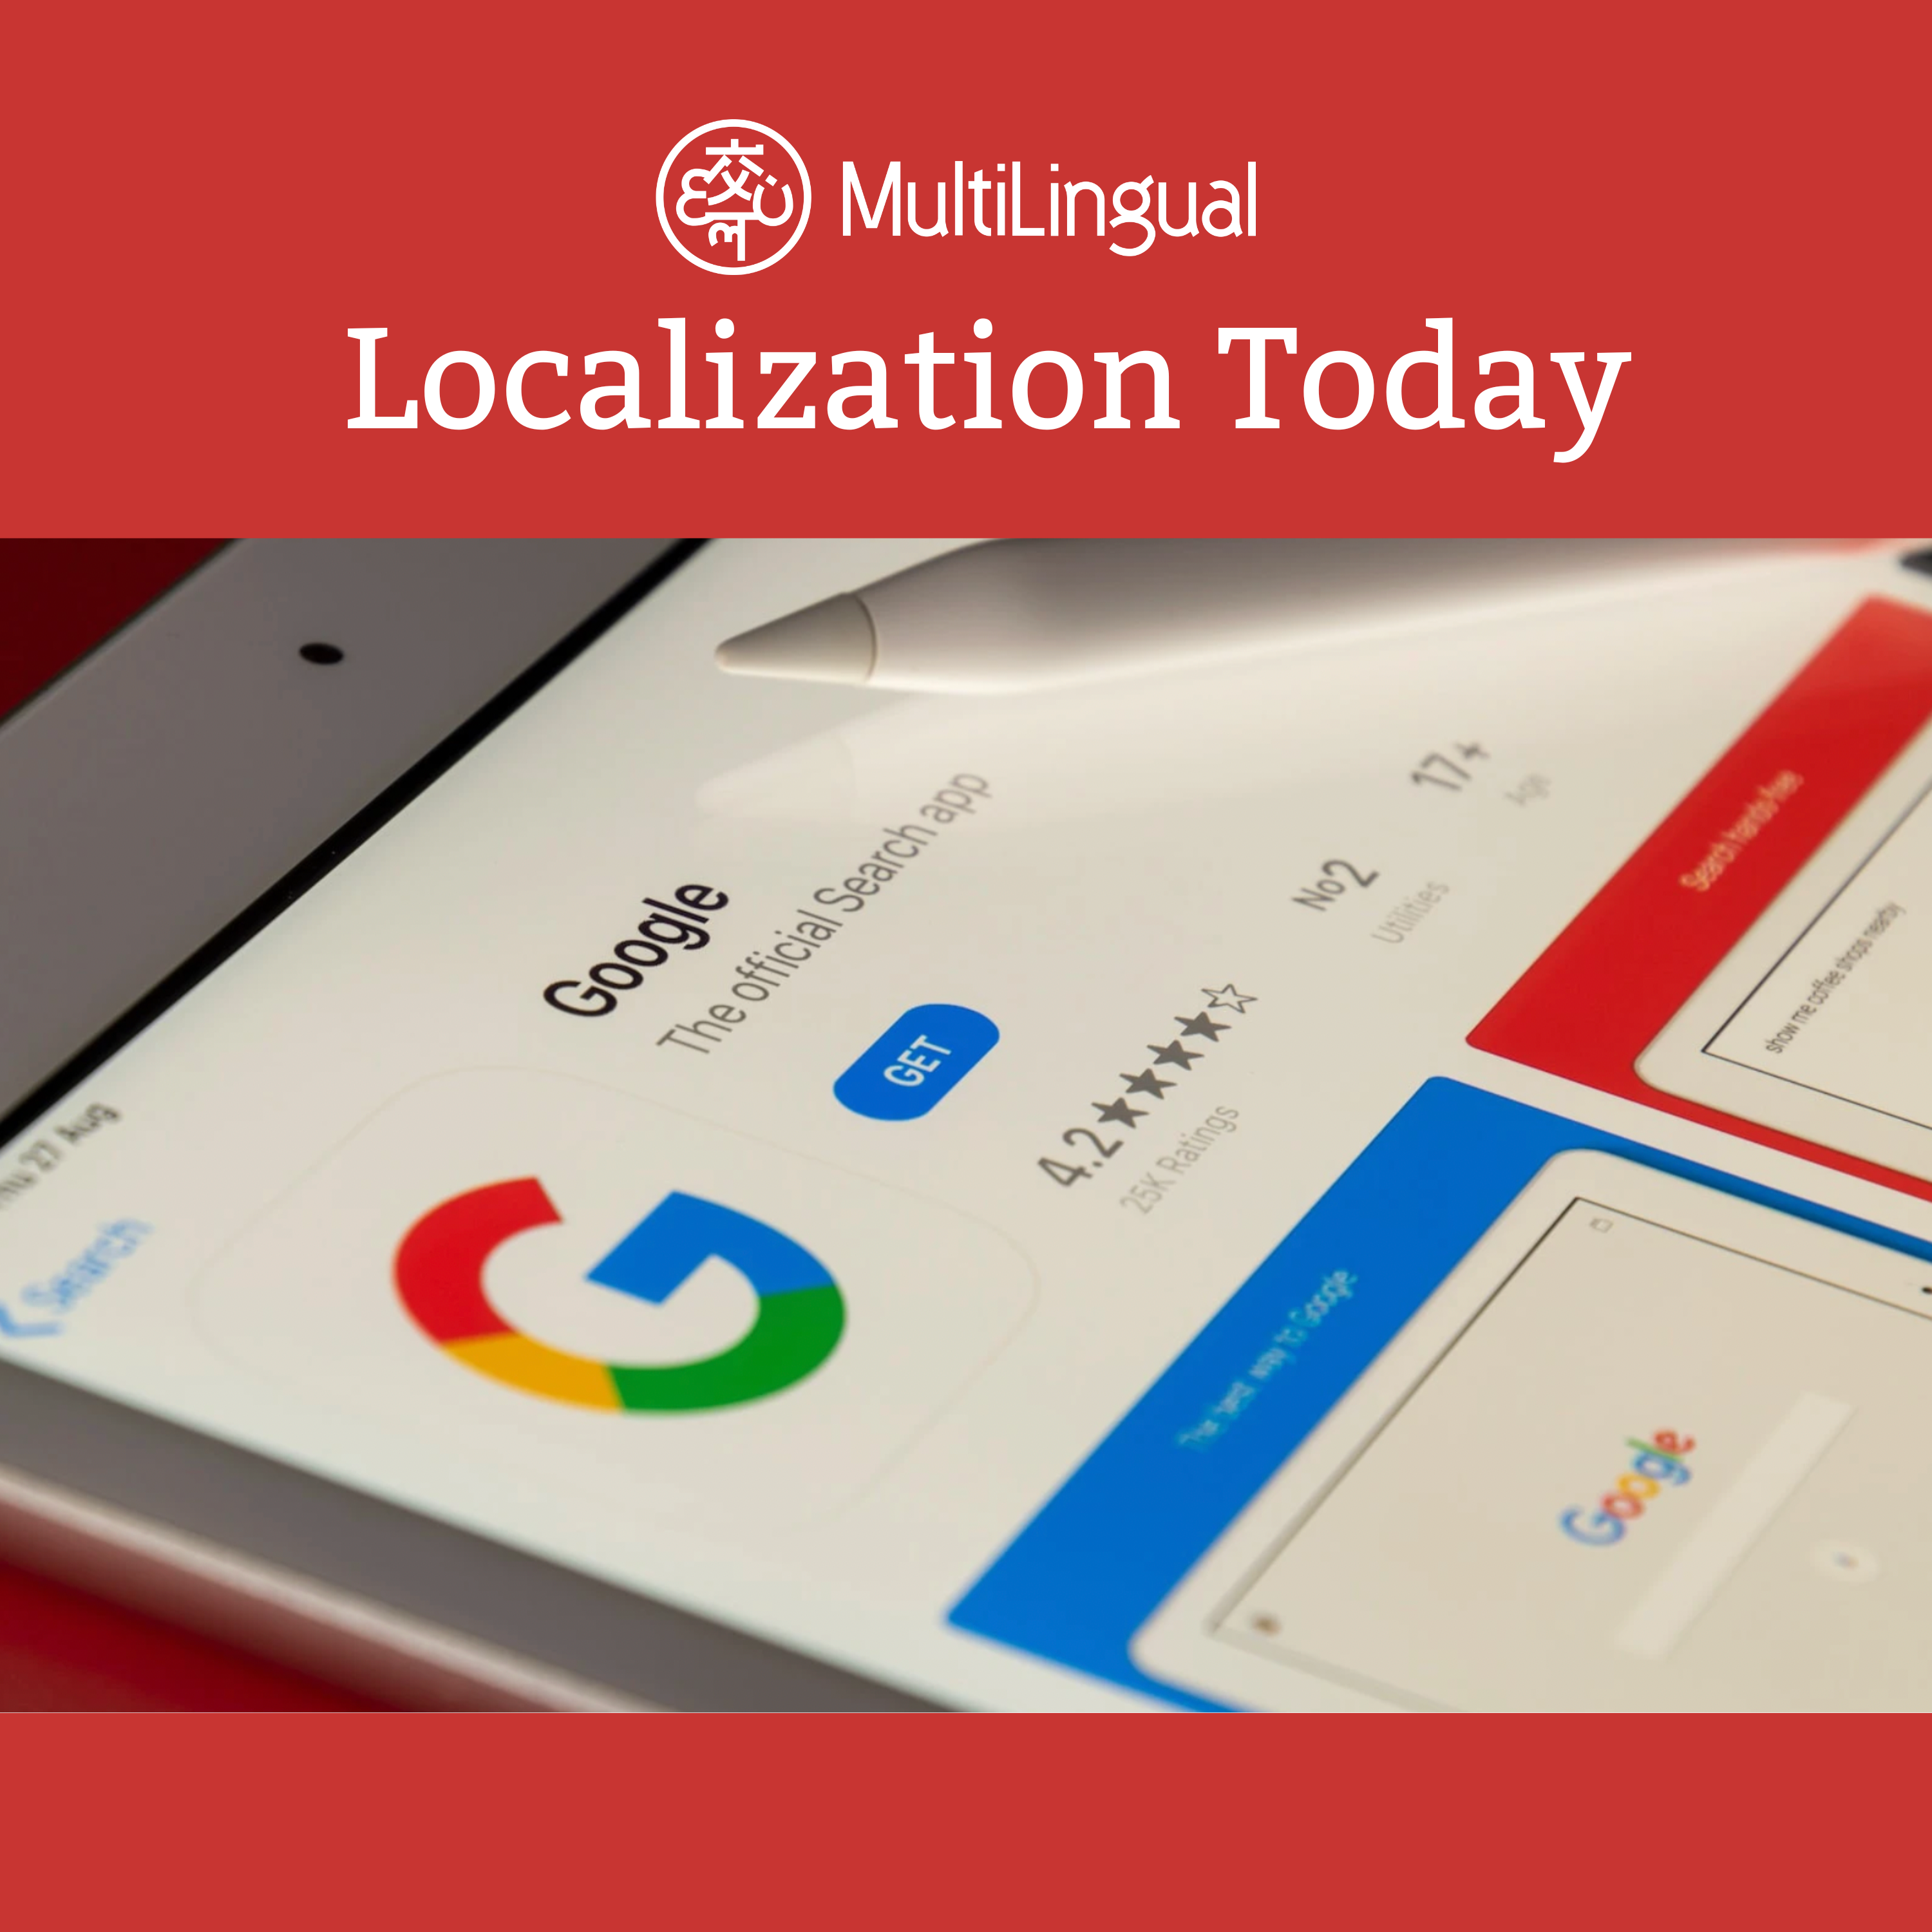 Google Search to begin translating local news into user’s preferred language